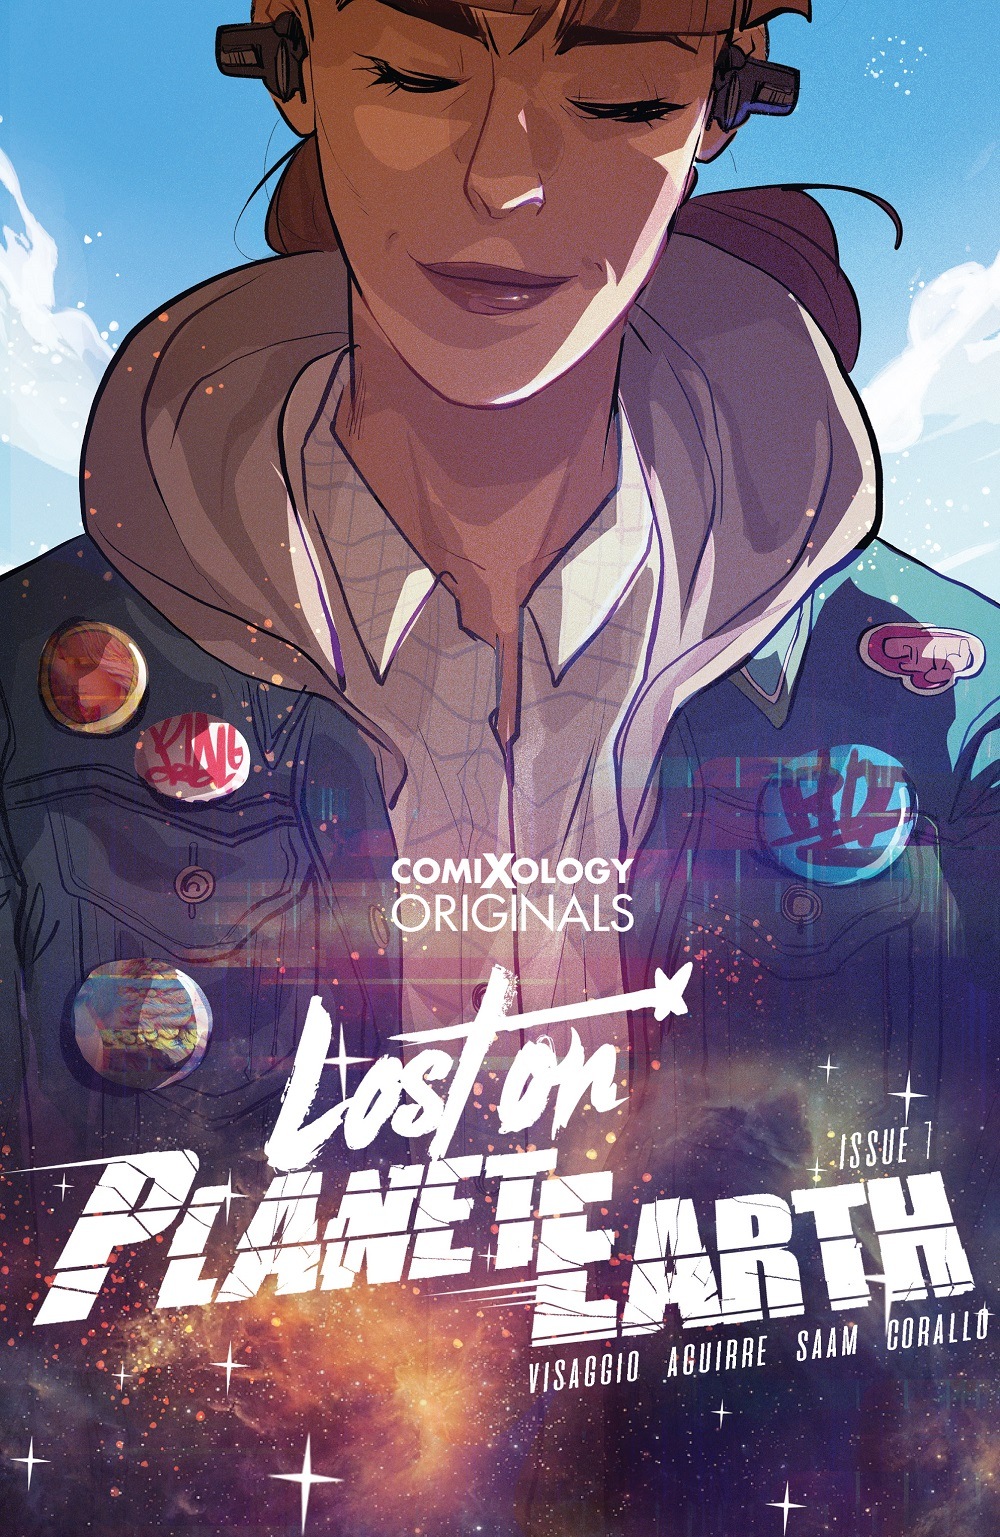 Lost on Planet Earth comixology